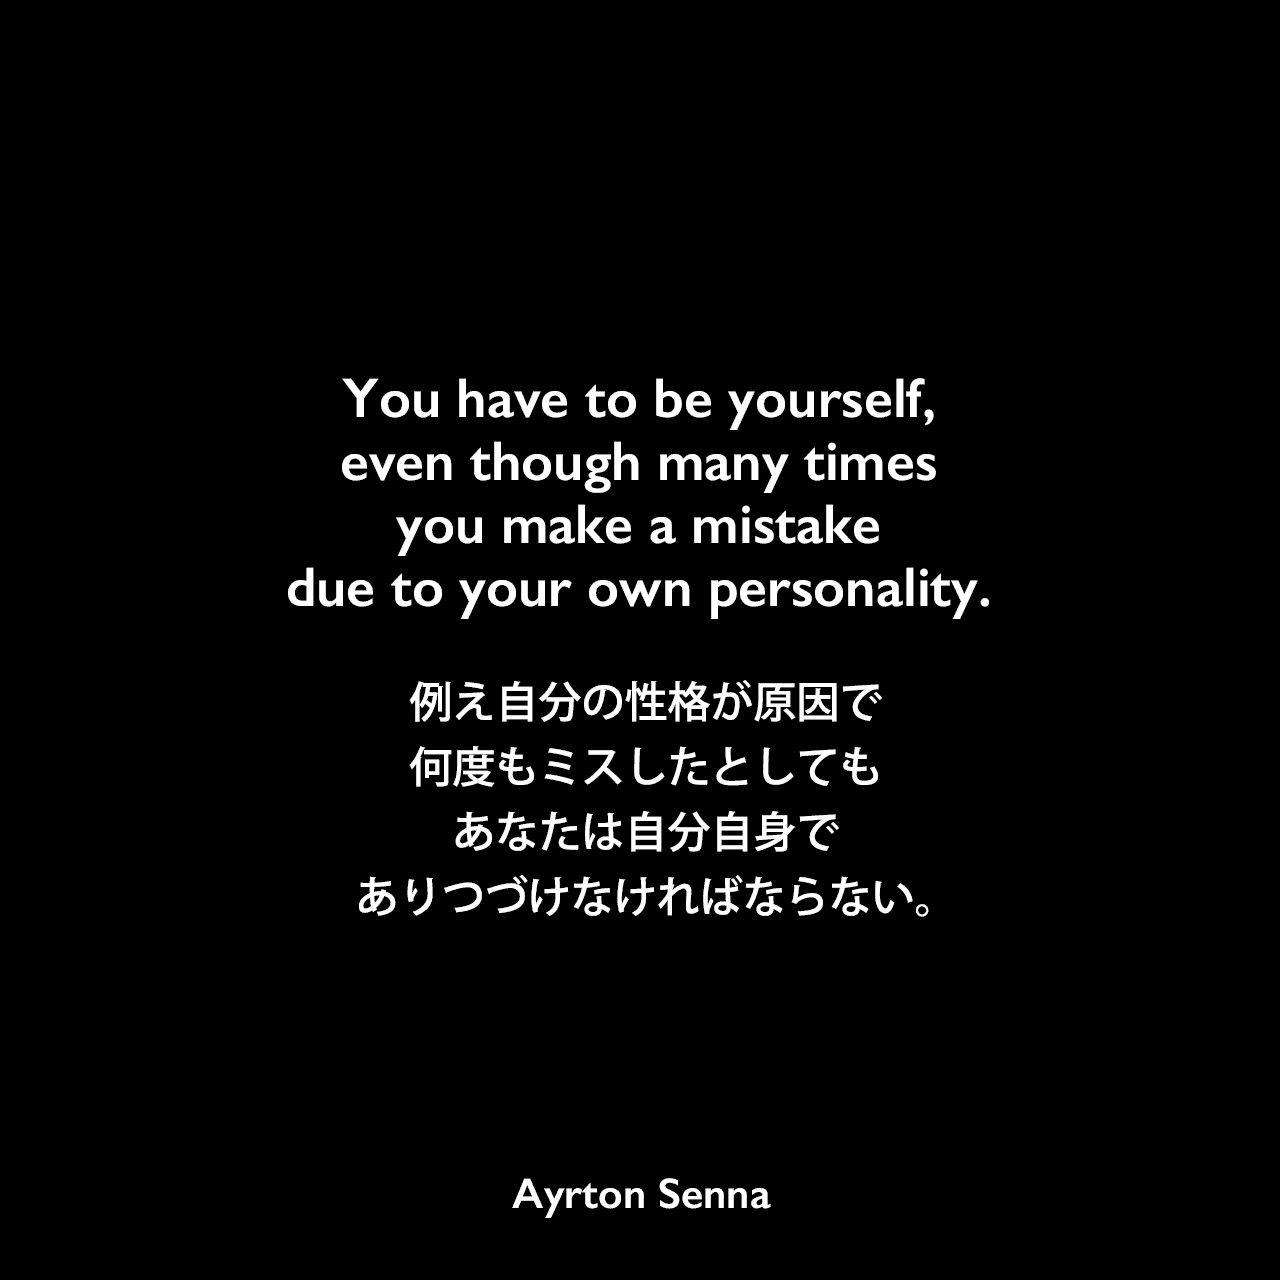 You have to be yourself, even though many times you make a mistake due to your own personality.例え自分の性格が原因で何度もミスしたとしても、あなたは自分自身でありつづけなければならない。Ayrton Senna